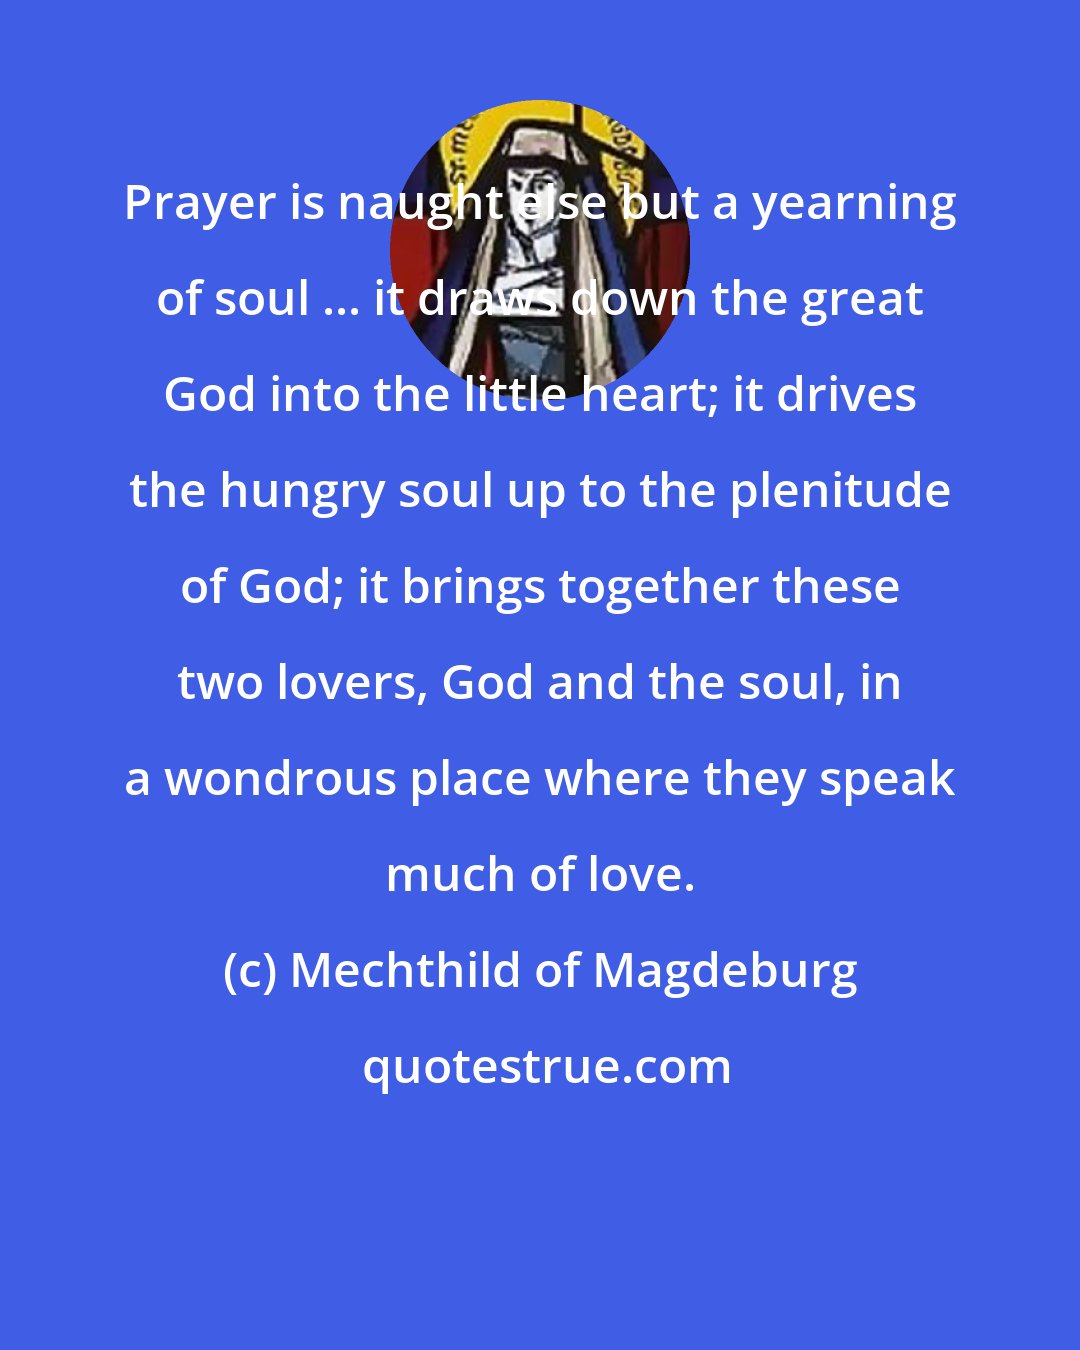 Mechthild of Magdeburg: Prayer is naught else but a yearning of soul ... it draws down the great God into the little heart; it drives the hungry soul up to the plenitude of God; it brings together these two lovers, God and the soul, in a wondrous place where they speak much of love.